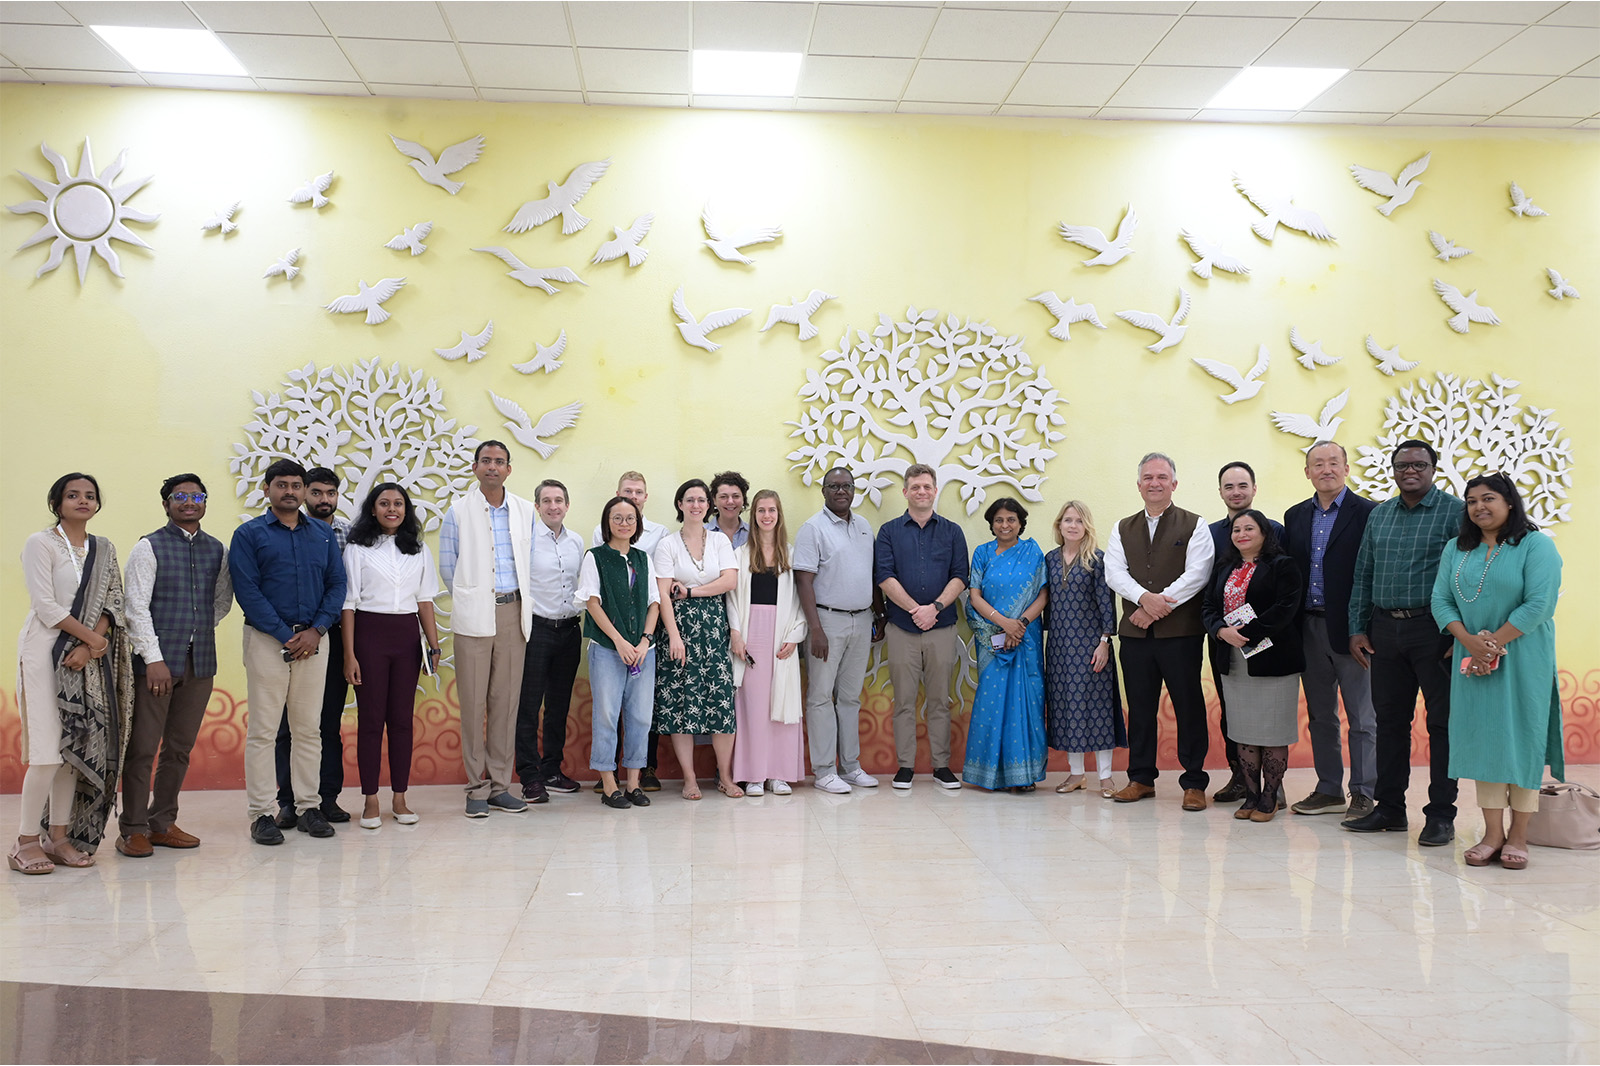 Dr. Jitendra Sharma, MD & Founder CEO of AMTZ, welcomes the WHO Delegation, showcasing innovative labs at AMTZ Medtech and Health Care Technology in India